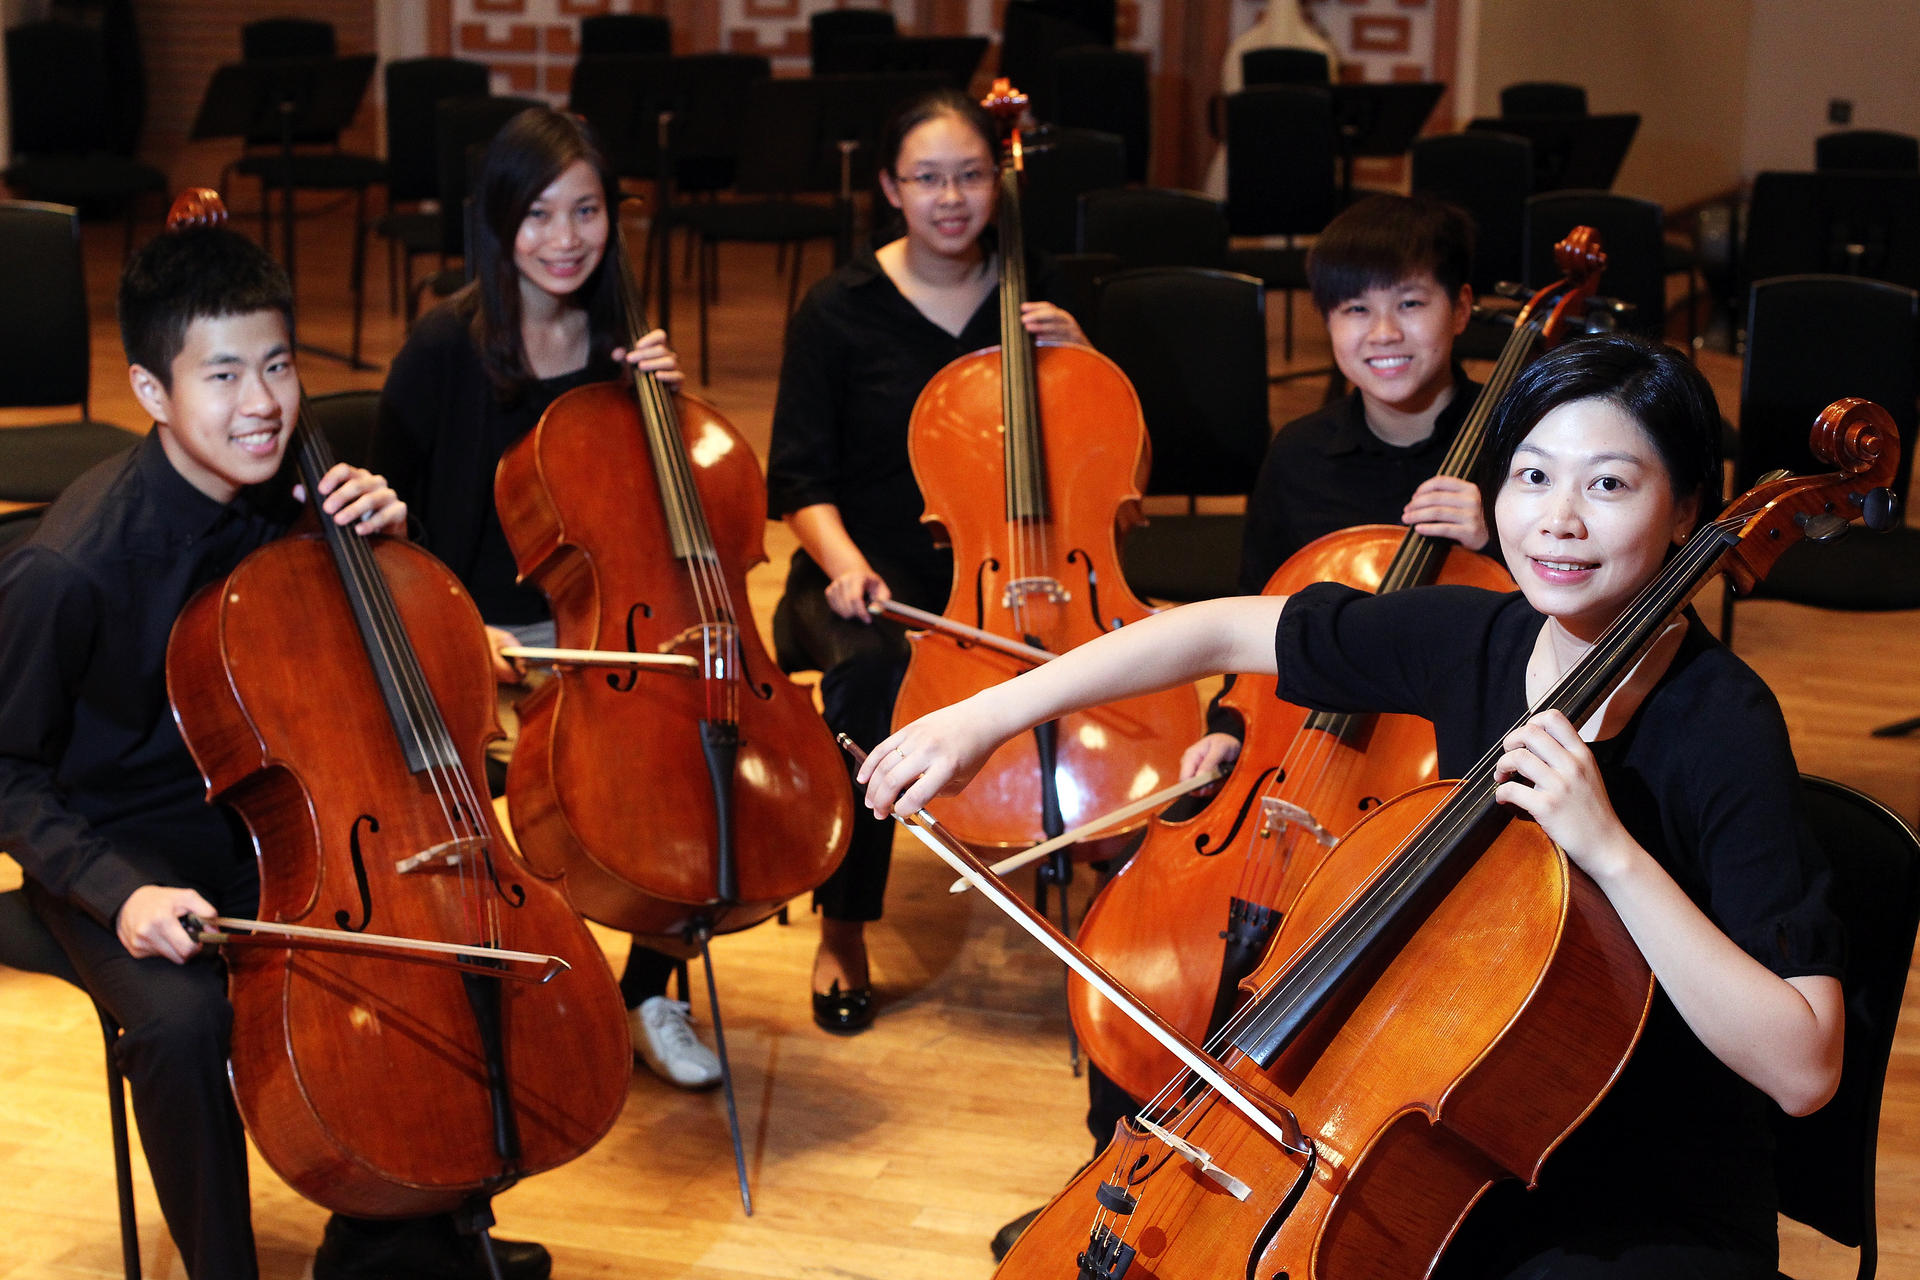 Left to right: Raron Chow, Jose Mak, Chavonne Lam, Charis Chan and Letty Poon rehearsing at the Cultural Centre. Photo: May Tse